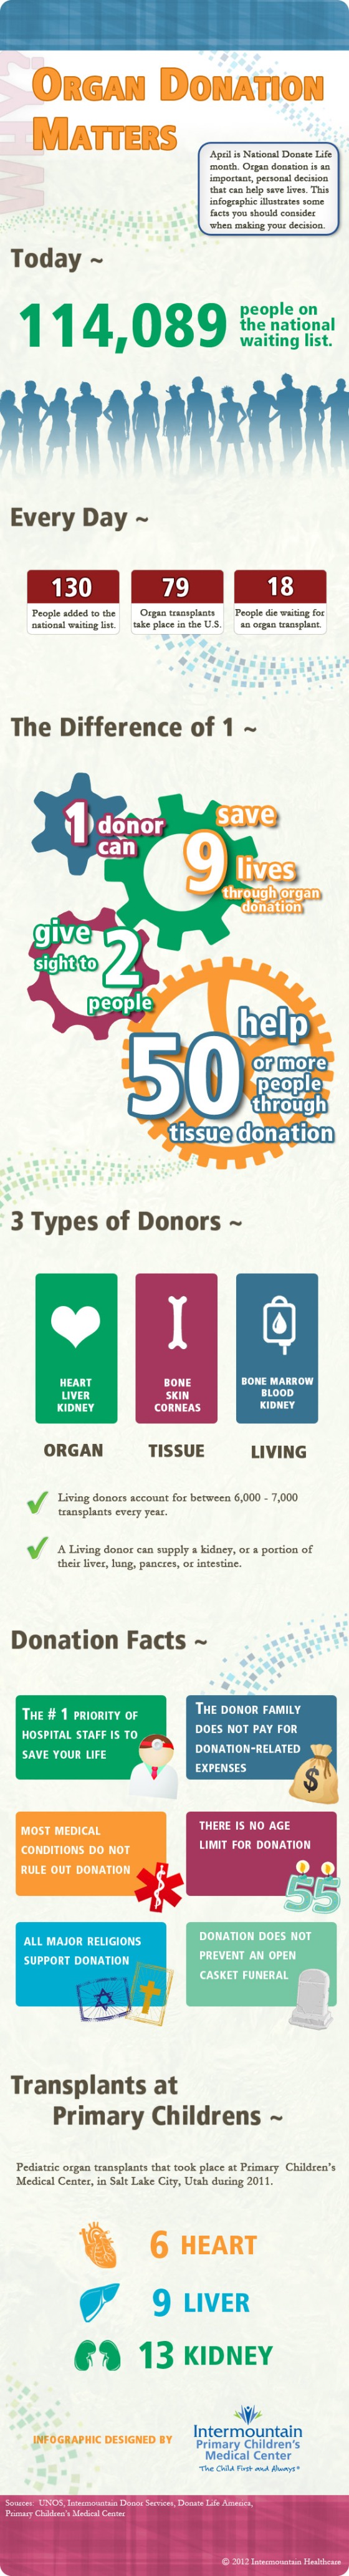 Why Organ Donation Matters Infographic